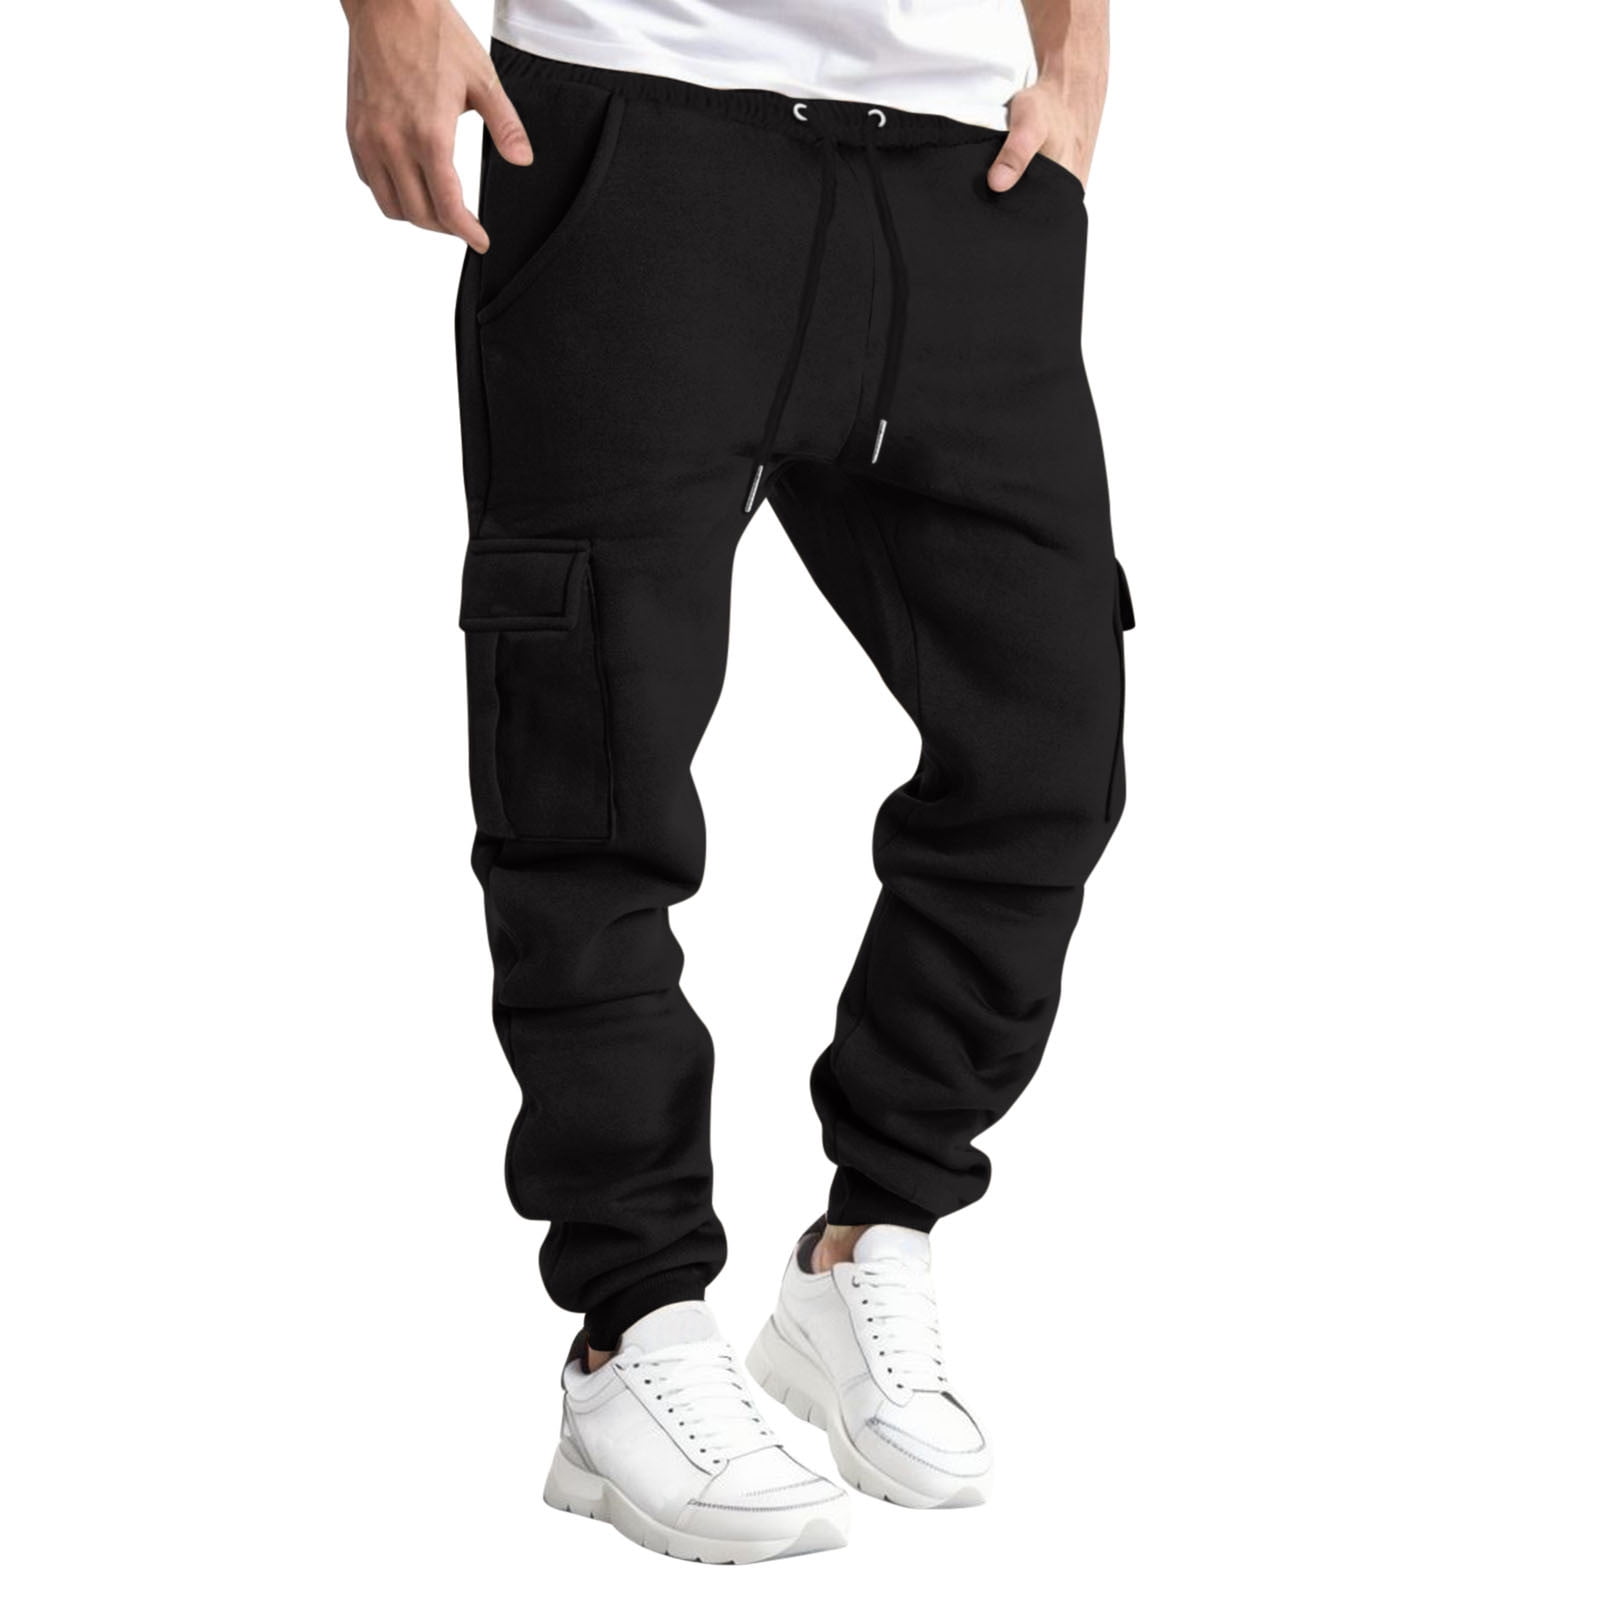 Cargo pants for men clearance under $20 Fashion Solid Casual Elastic Waist  With Pocket Trousers Sport tactical pants for men stretch 5.11 Pants Coffee  M 